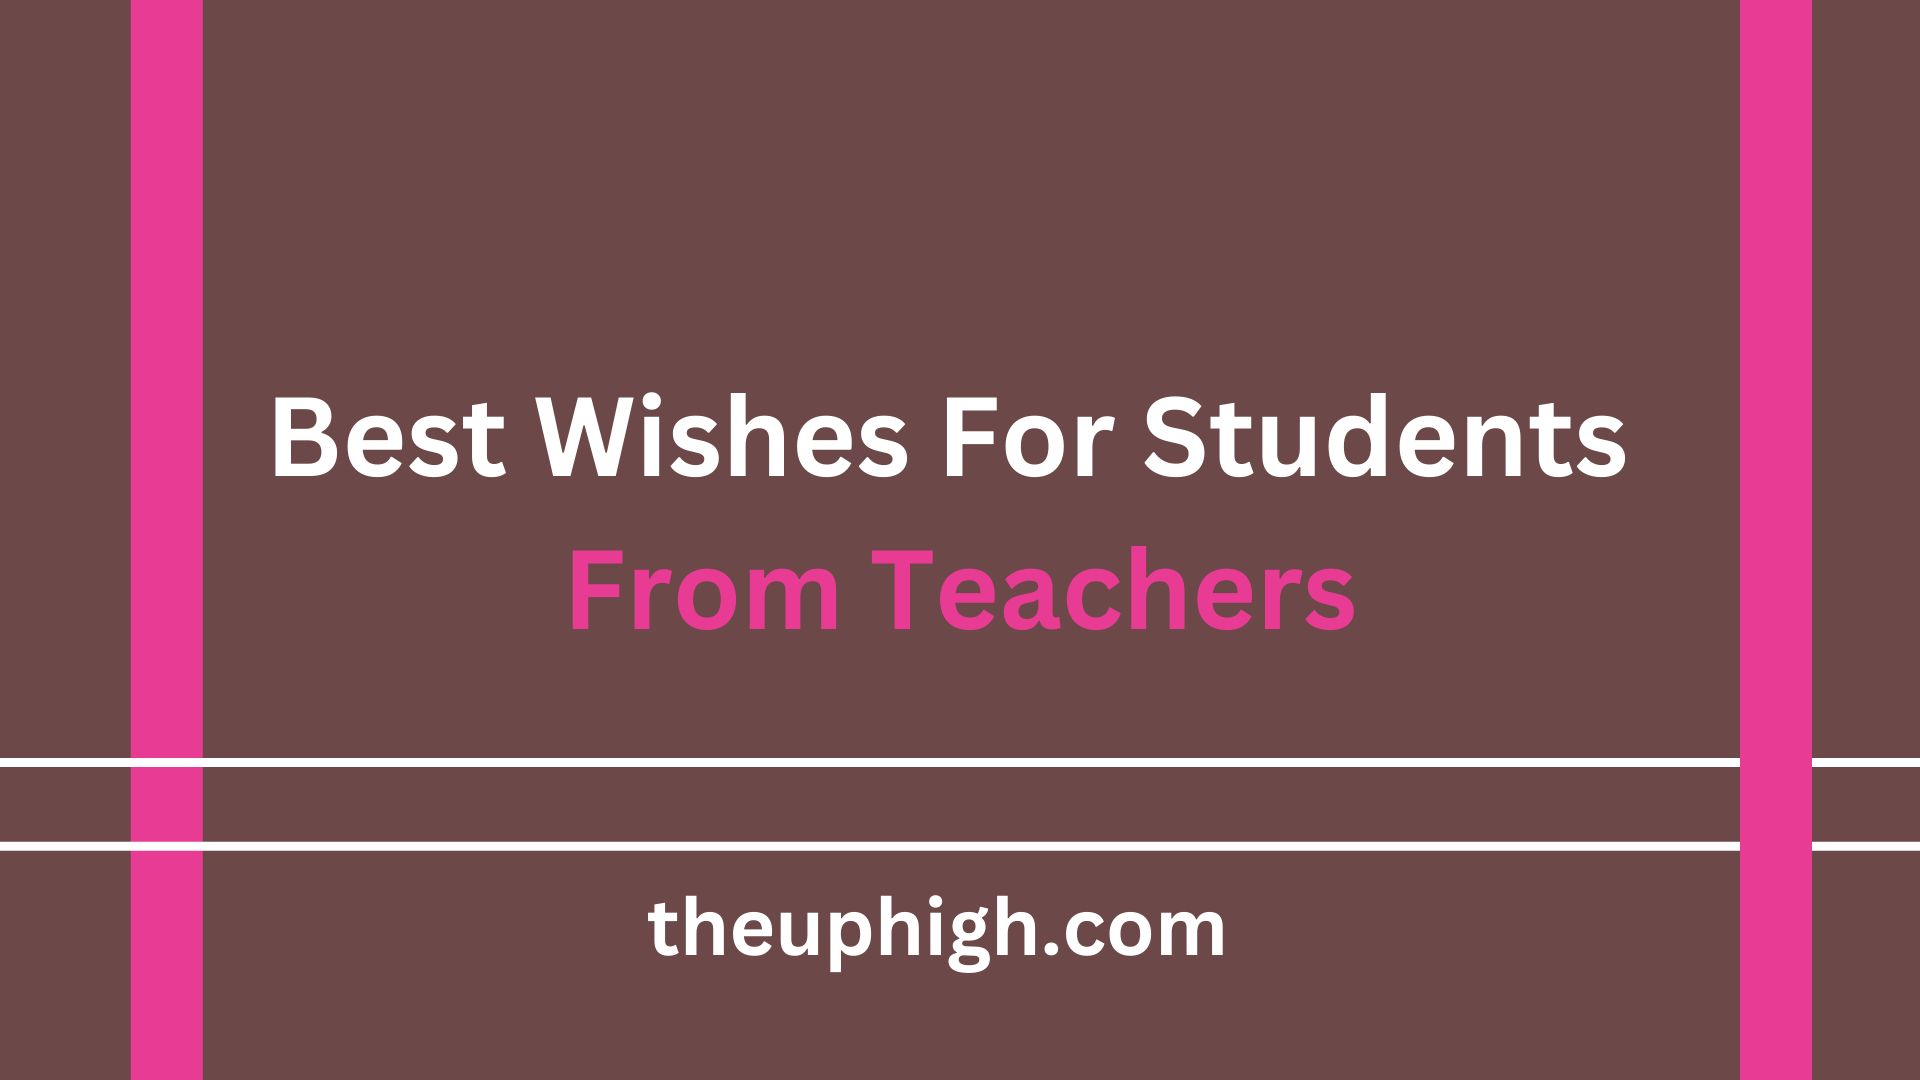 Best Wishes For Students From Teachers